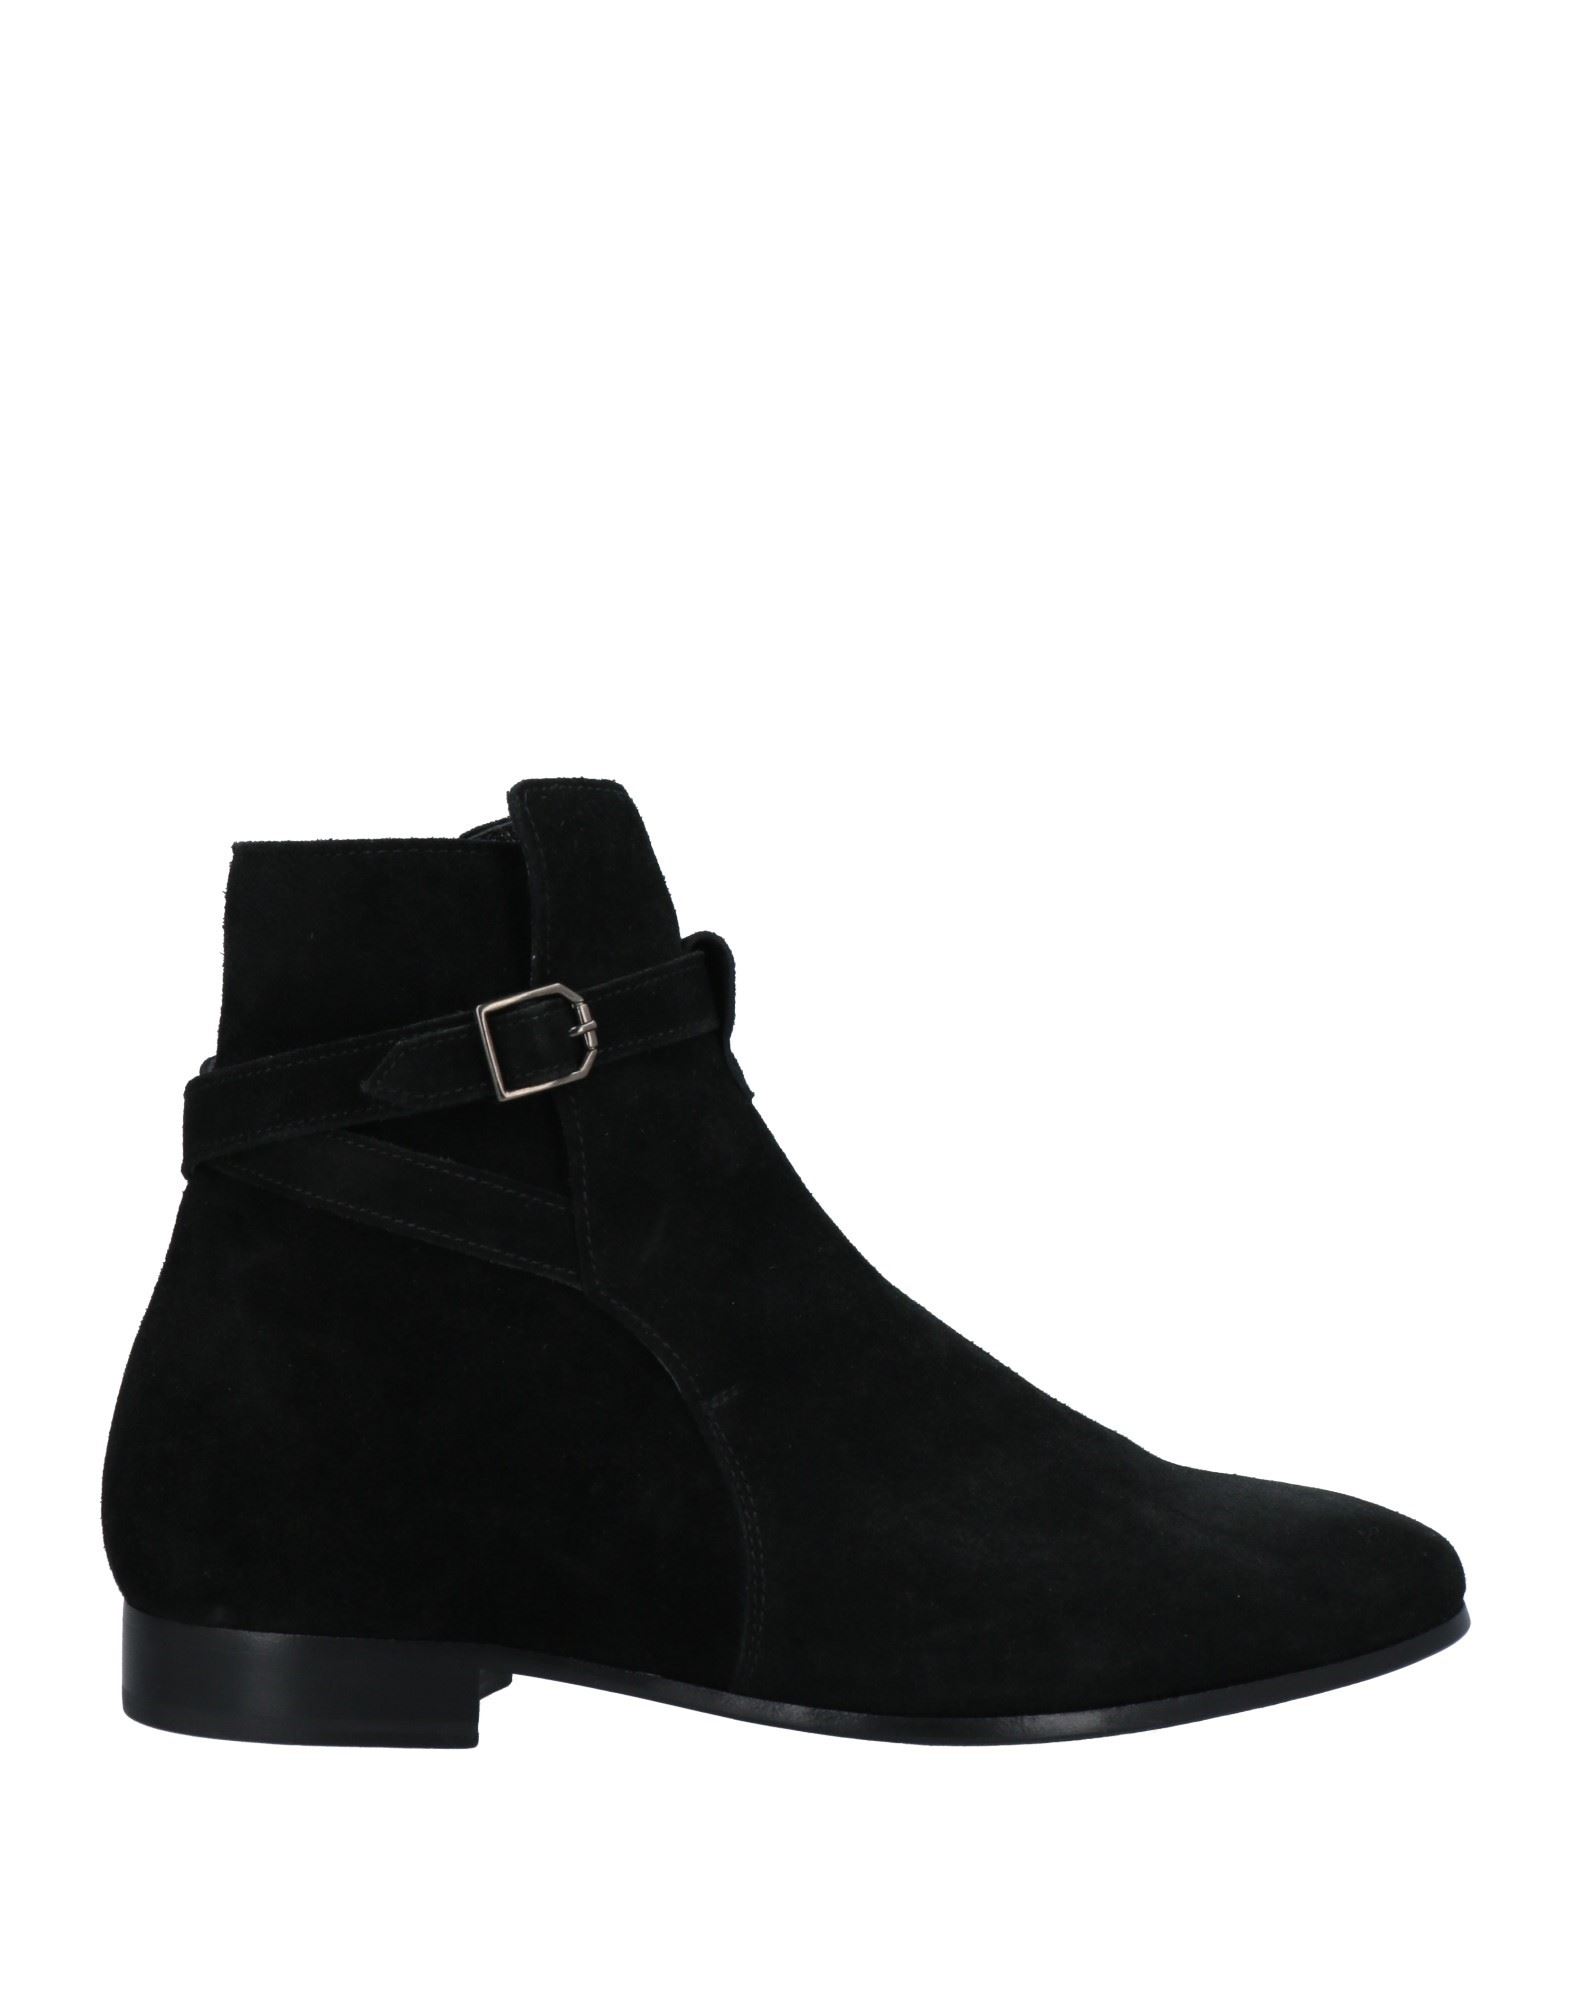 Unconventional Royal Ankle Boots In Black